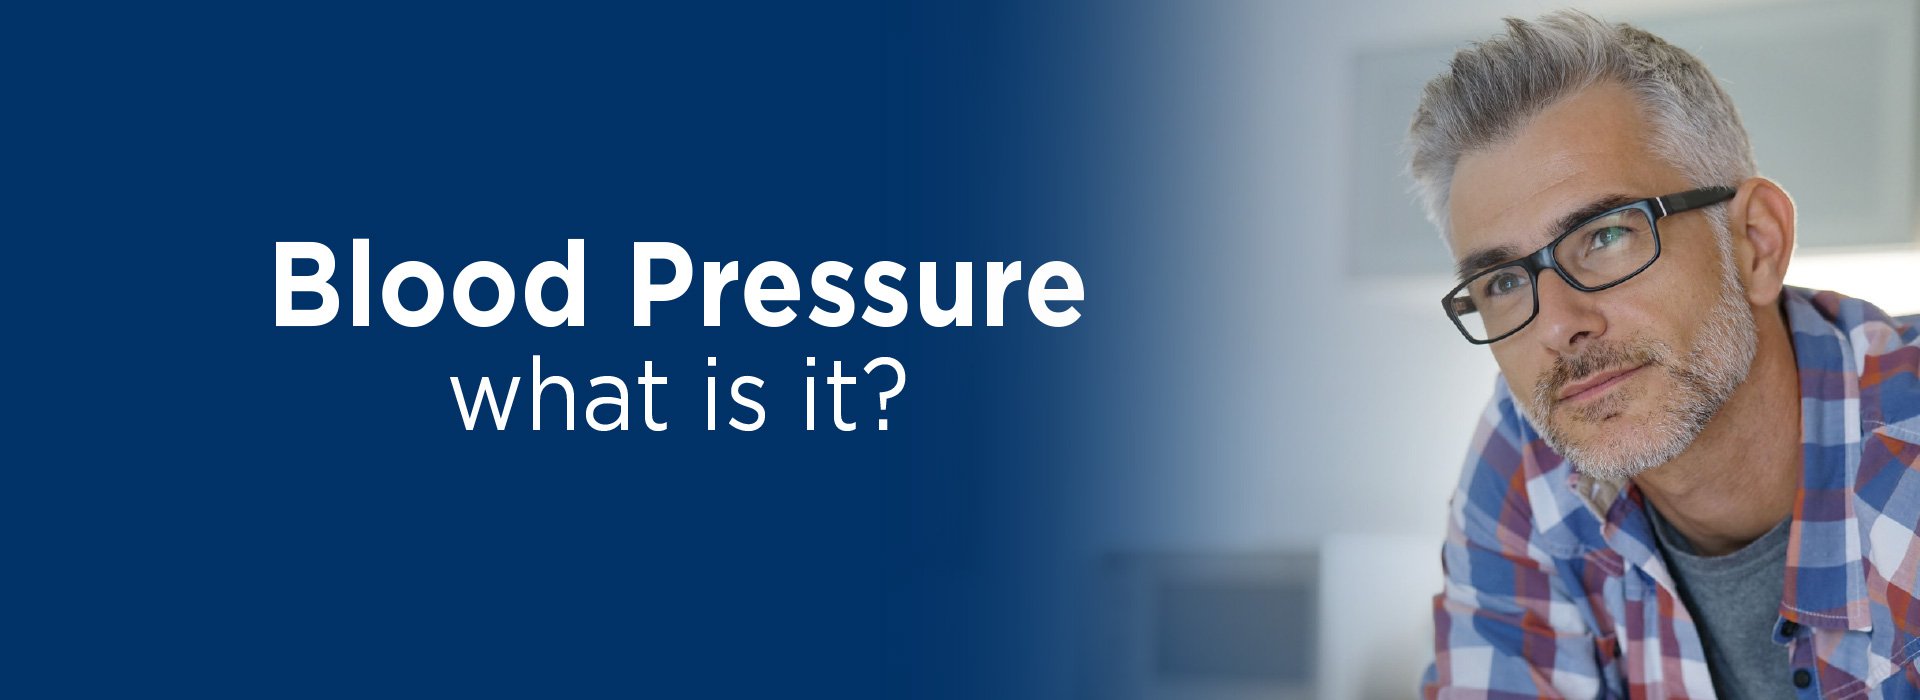 New Image International:Blood Pressure - What is it?